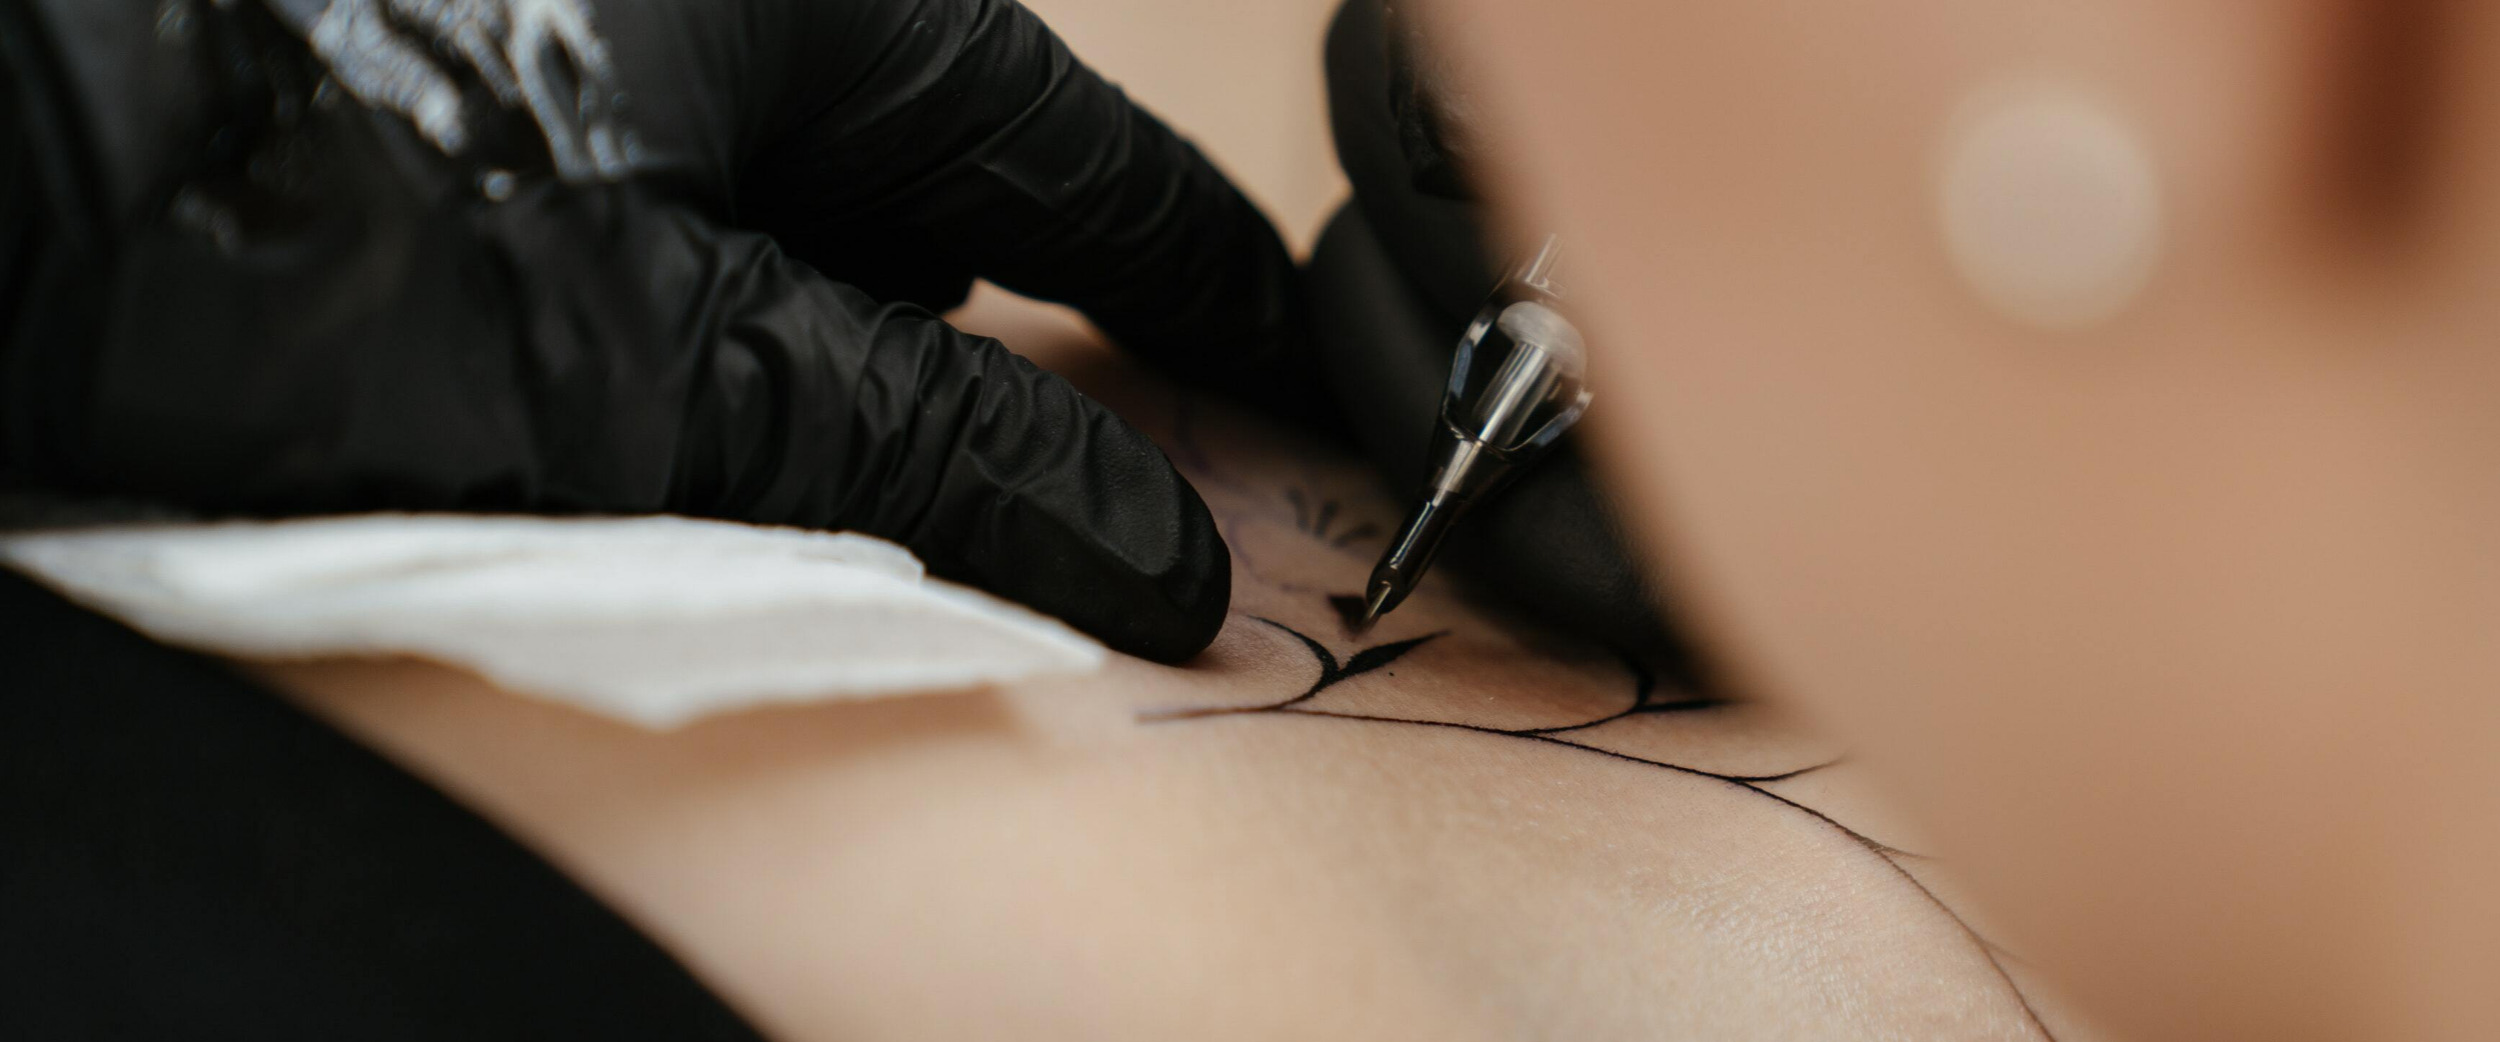 Considering a Mastectomy Tattoo? Here's What You Need to Know, Our Voices  Blog - CBCN